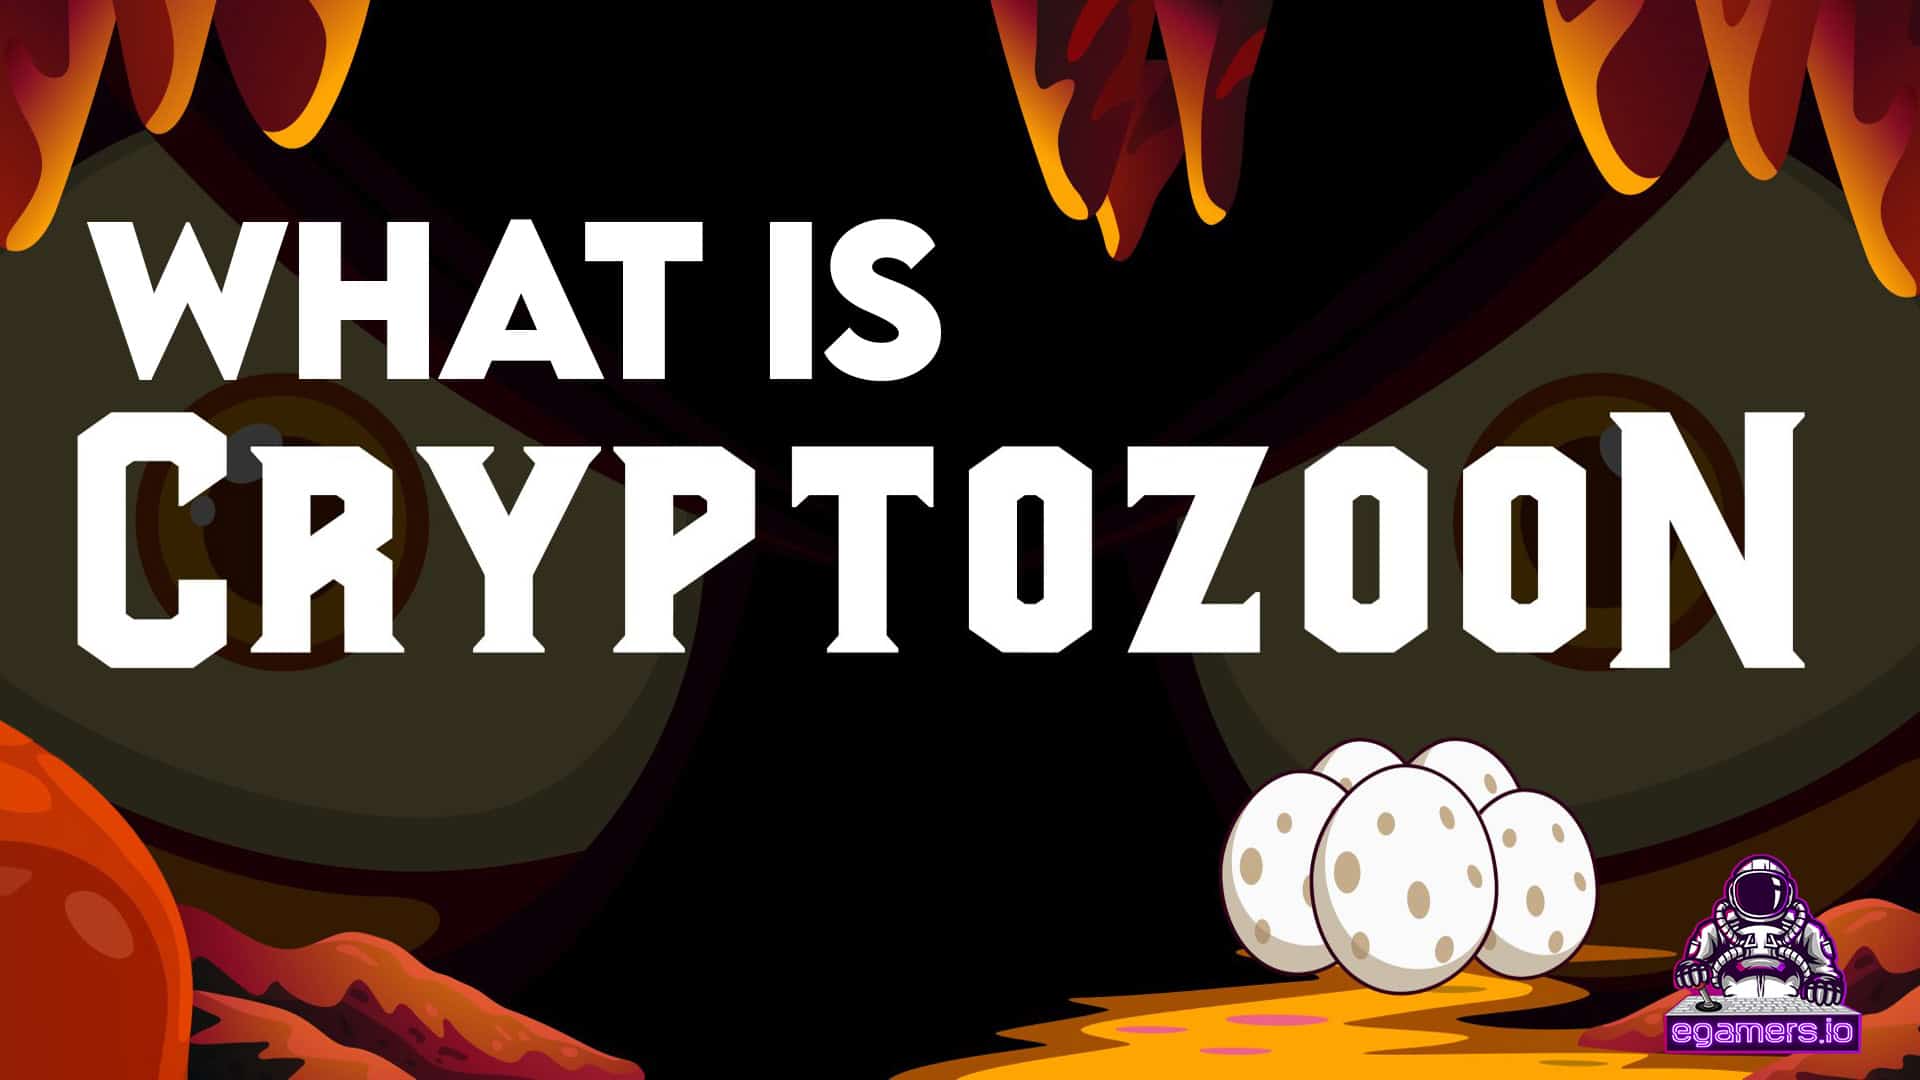 What is Cryptozoon?